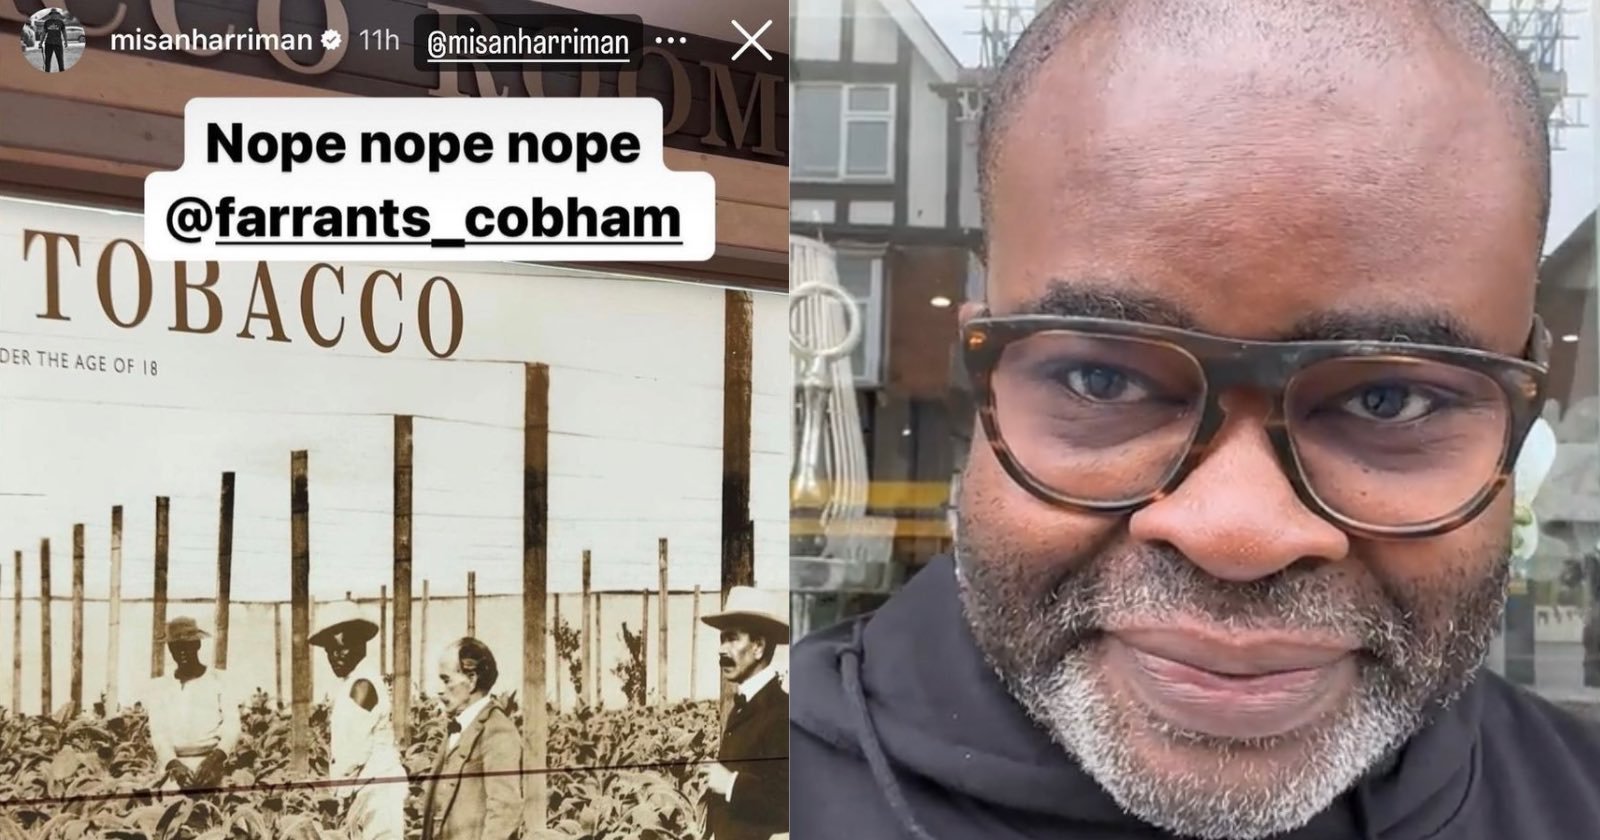 Royal Photographer Accuses Store of Racism Over Triggering Plantation Photo